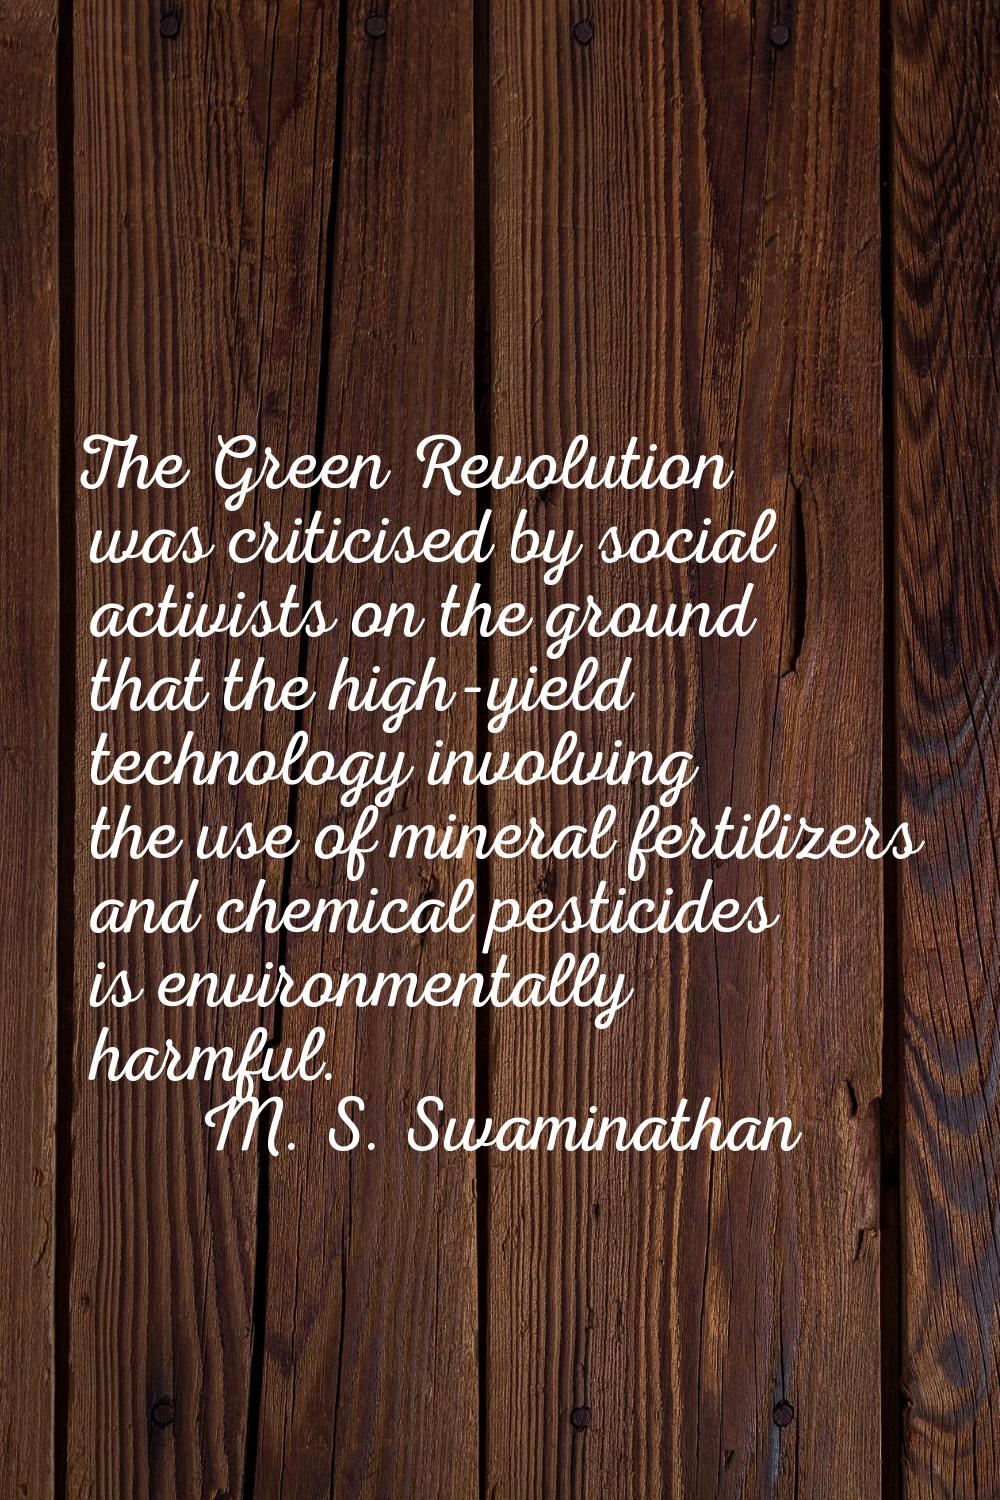 The Green Revolution was criticised by social activists on the ground that the high-yield technolog